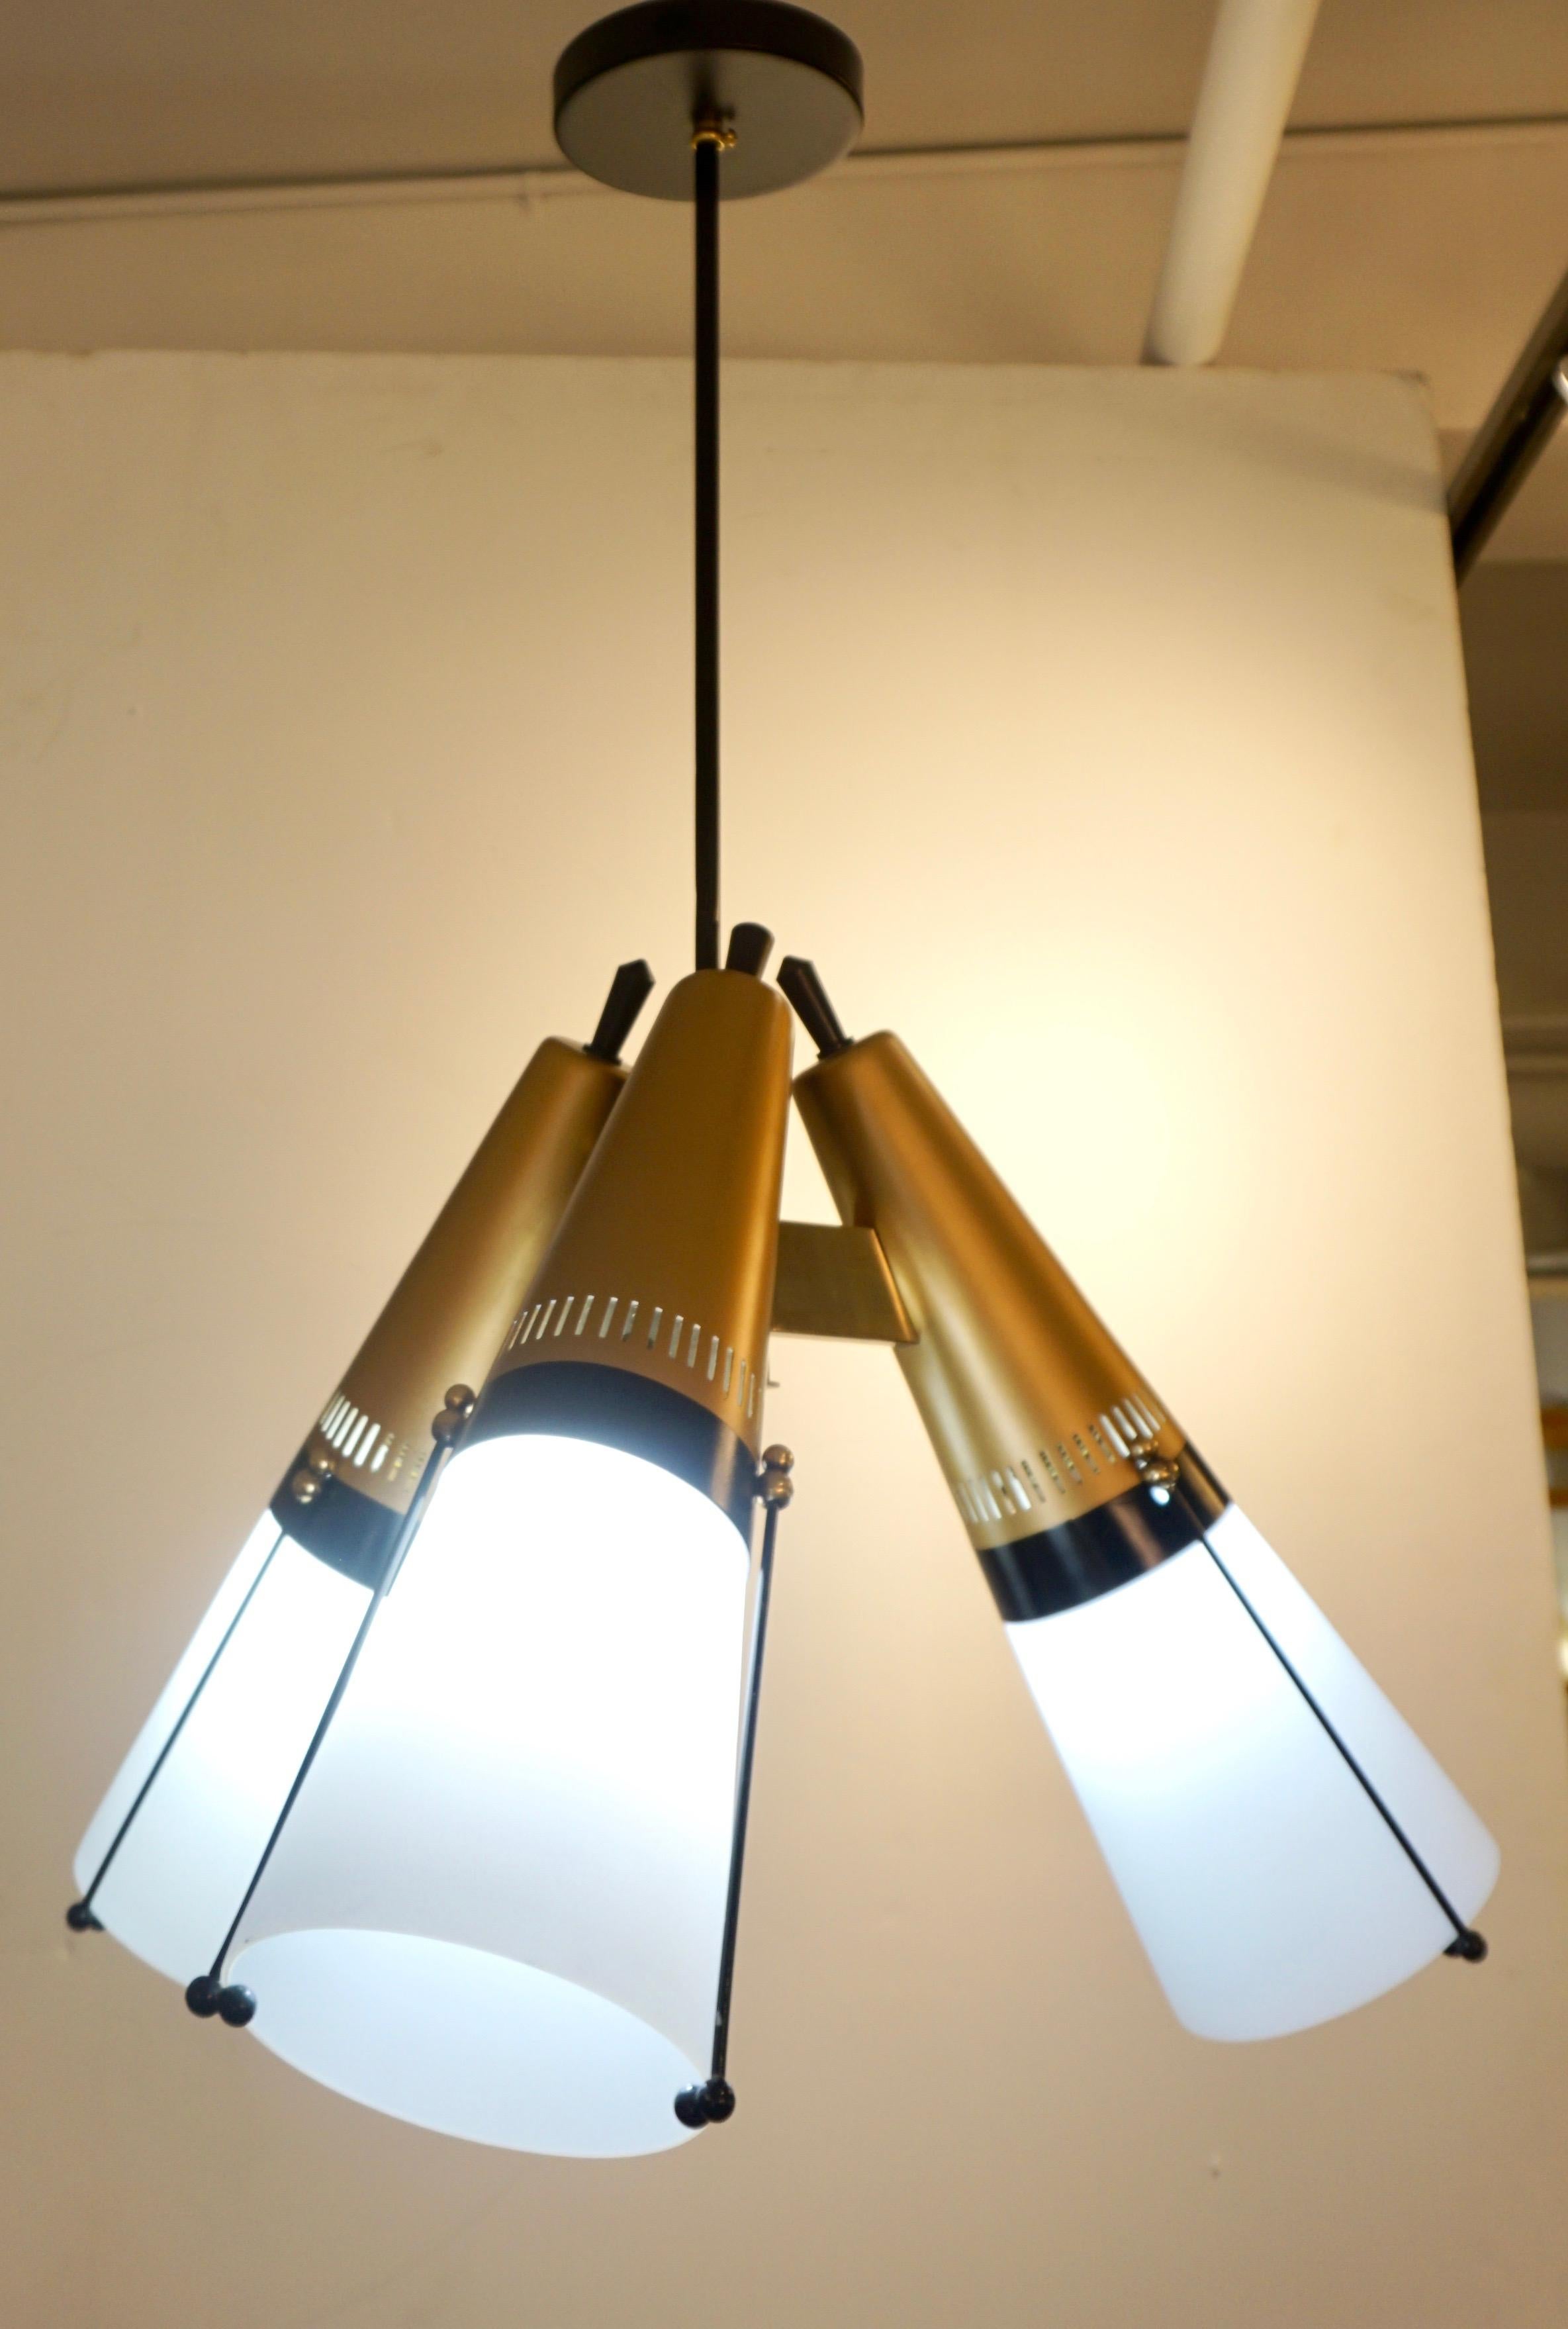 A 1950s delightful 3-light modern design pendant chandelier attributed to the Italian designer Oscar Torlasco. Three cones in white glass, enclosing the light source and ending in a perforated metal upper part, cold painted in matt gold brass color,